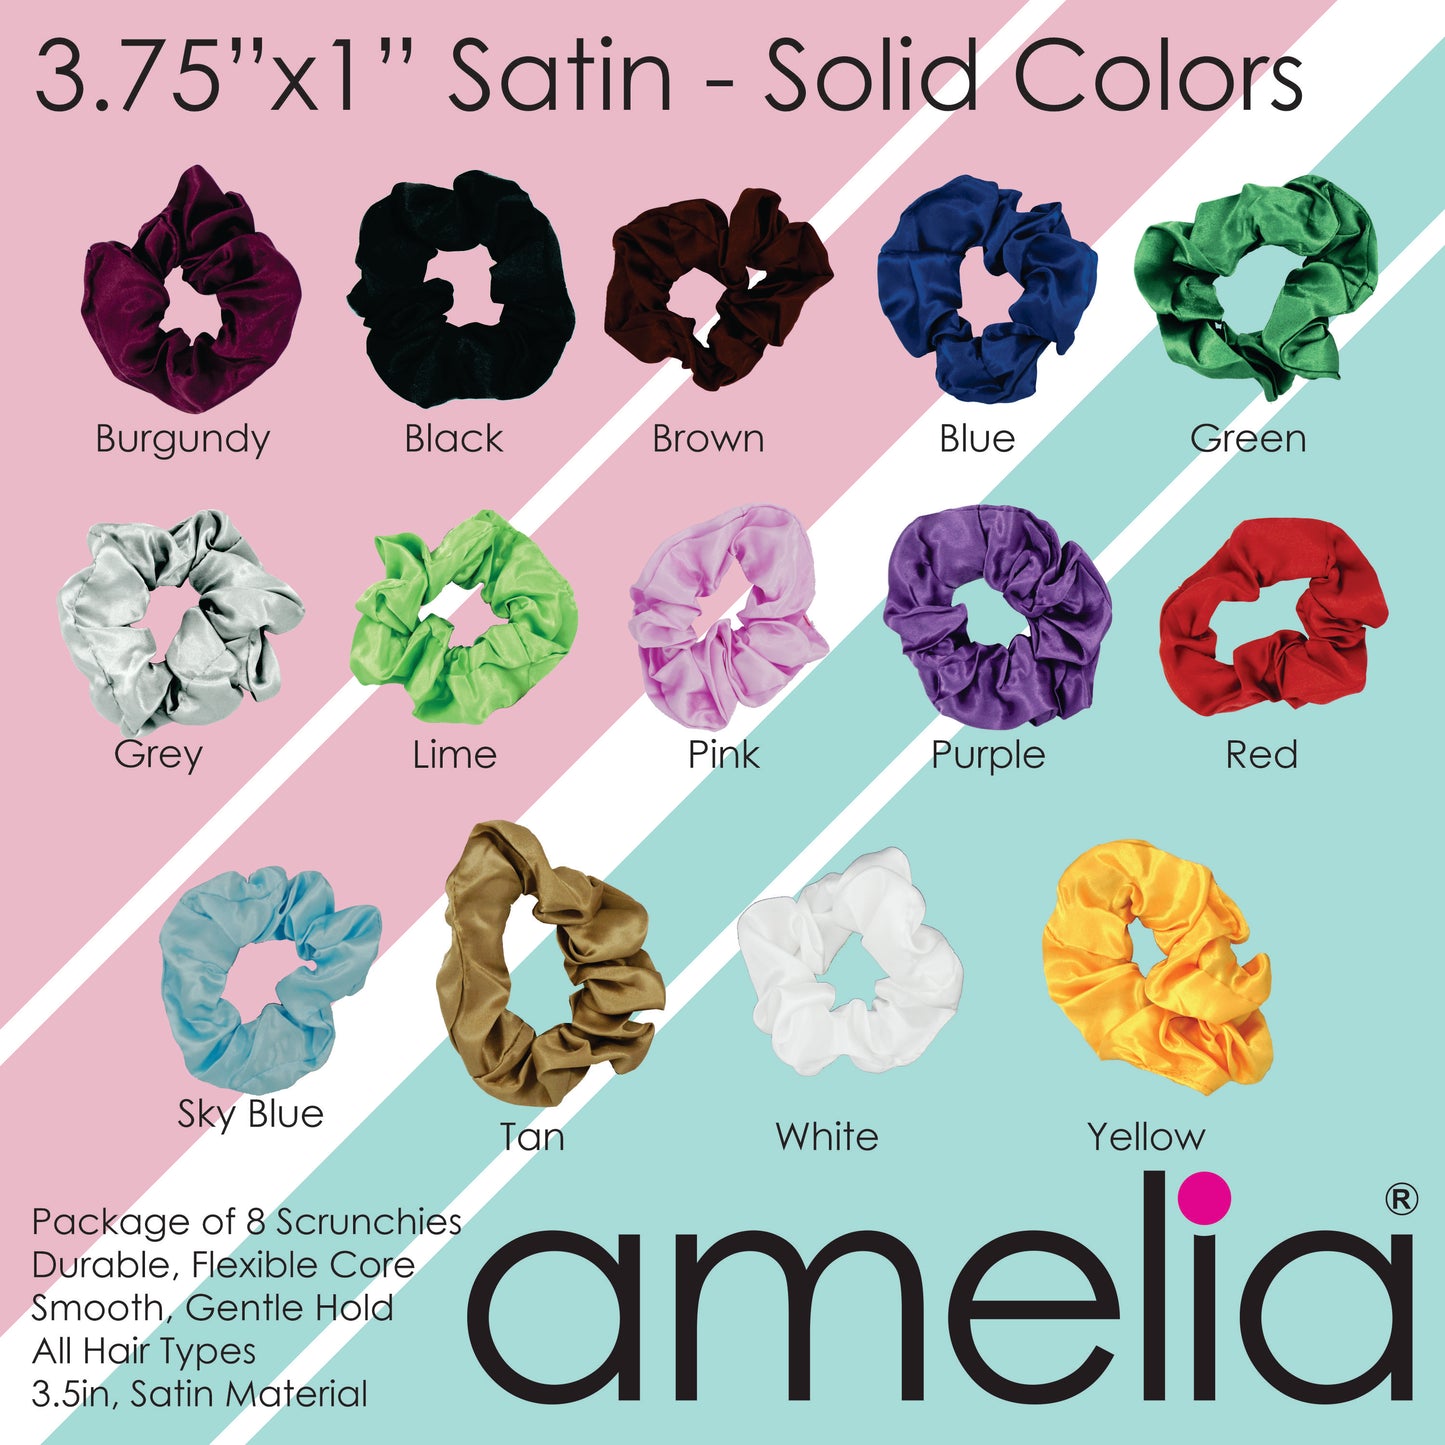 Amelia Beauty Products, Brown Satin Scrunchies, 3.5in Diameter, Gentle on Hair, Strong Hold, No Snag, No Dents or Creases. 8 Pack